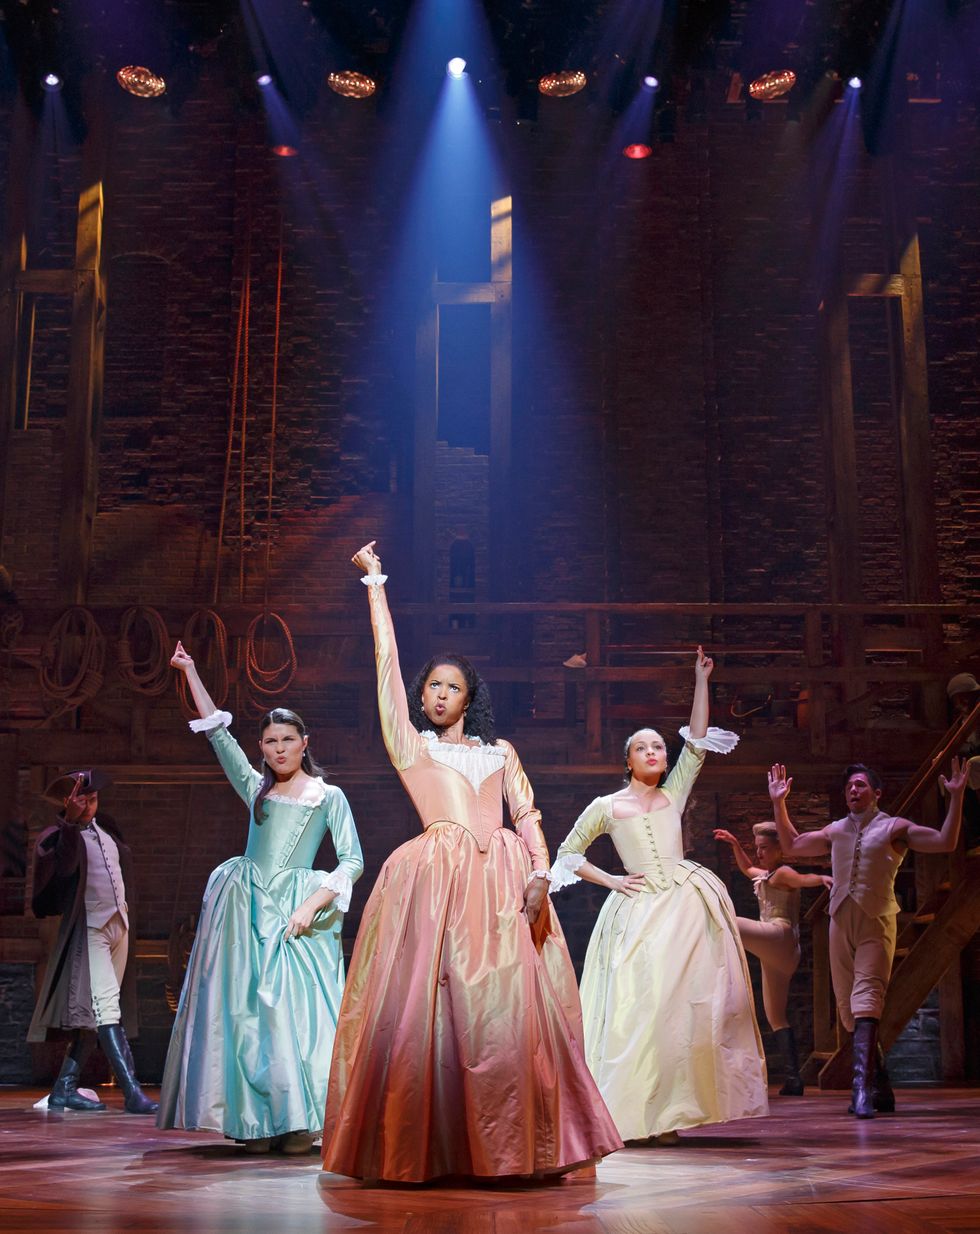 Phillipa Soo, Renu00e9e Elise Goldsberry and Jasmine Cephas Jones each extend one arm overhead as they snap, leaning into their hips. They wear shiny, pastel-colored dresses that nod to Hamilton's late 18th-century setting.